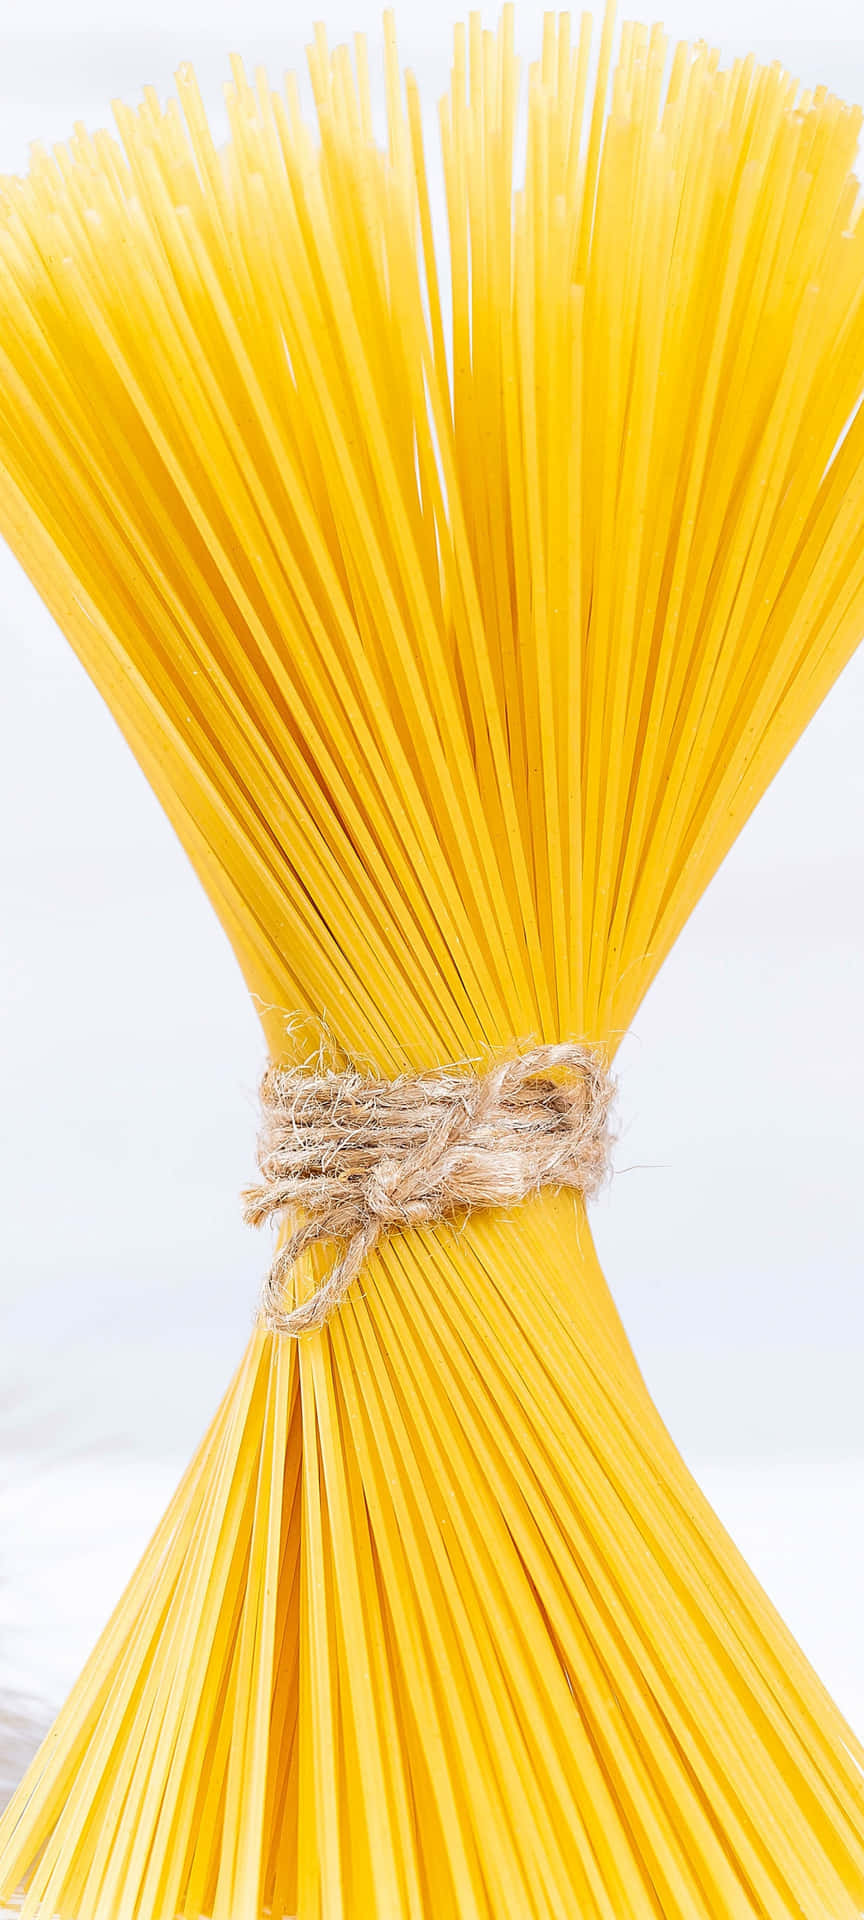 A Pile Of Yellow Spaghetti On A White Background